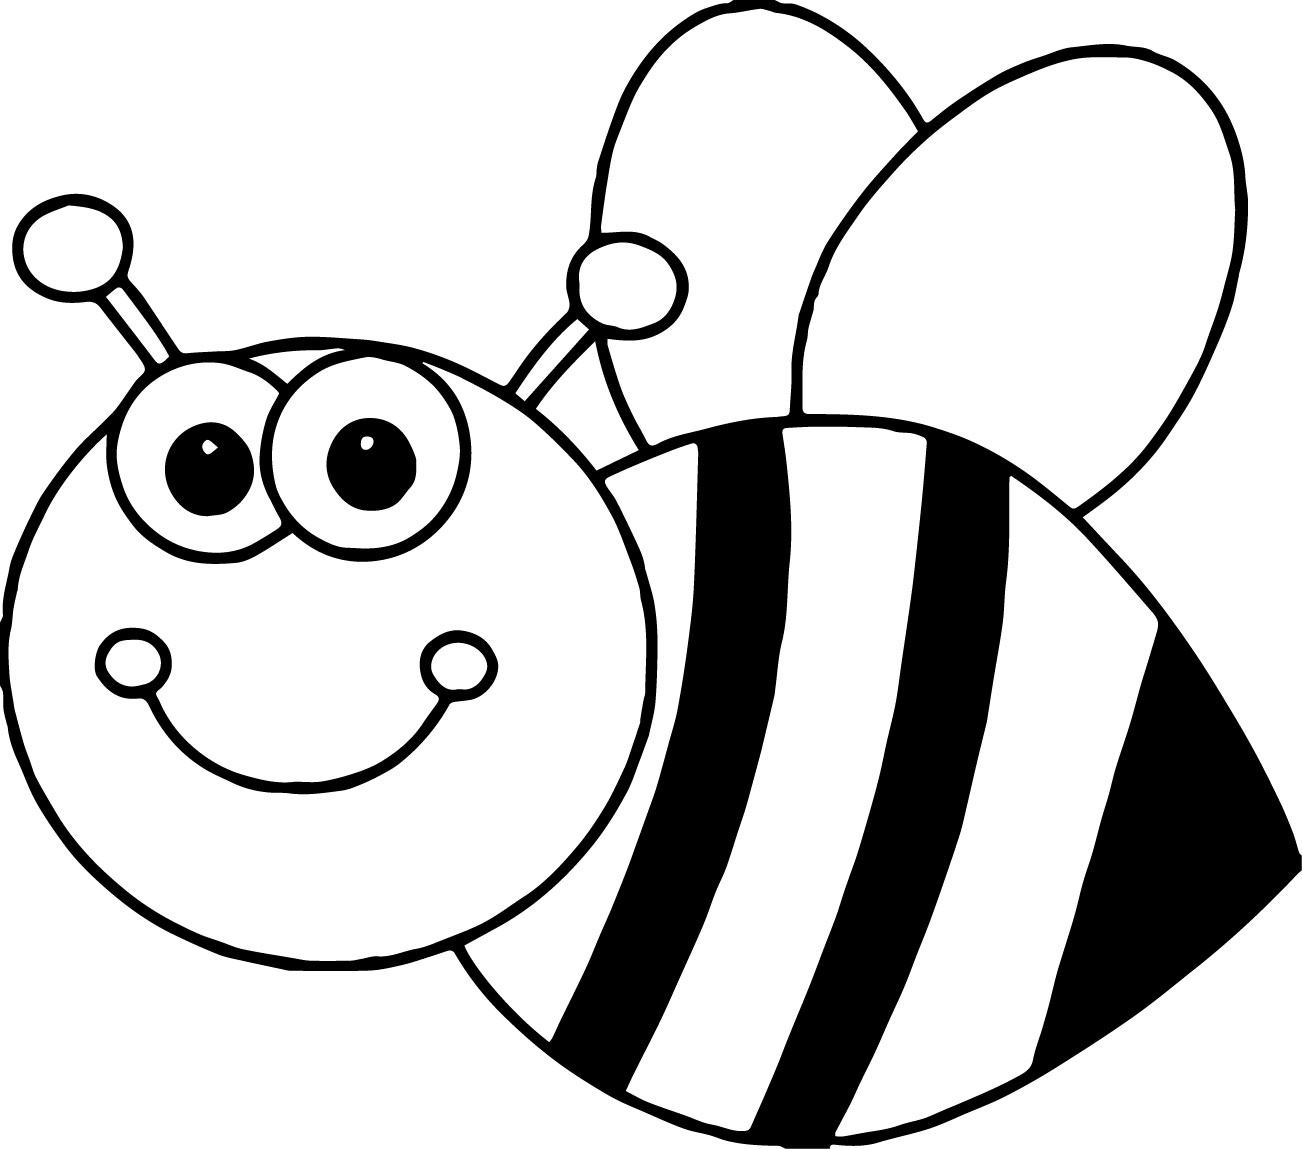 bumble-bee-coloring-page-sheets-draw-bumble-bee-coloring-pages